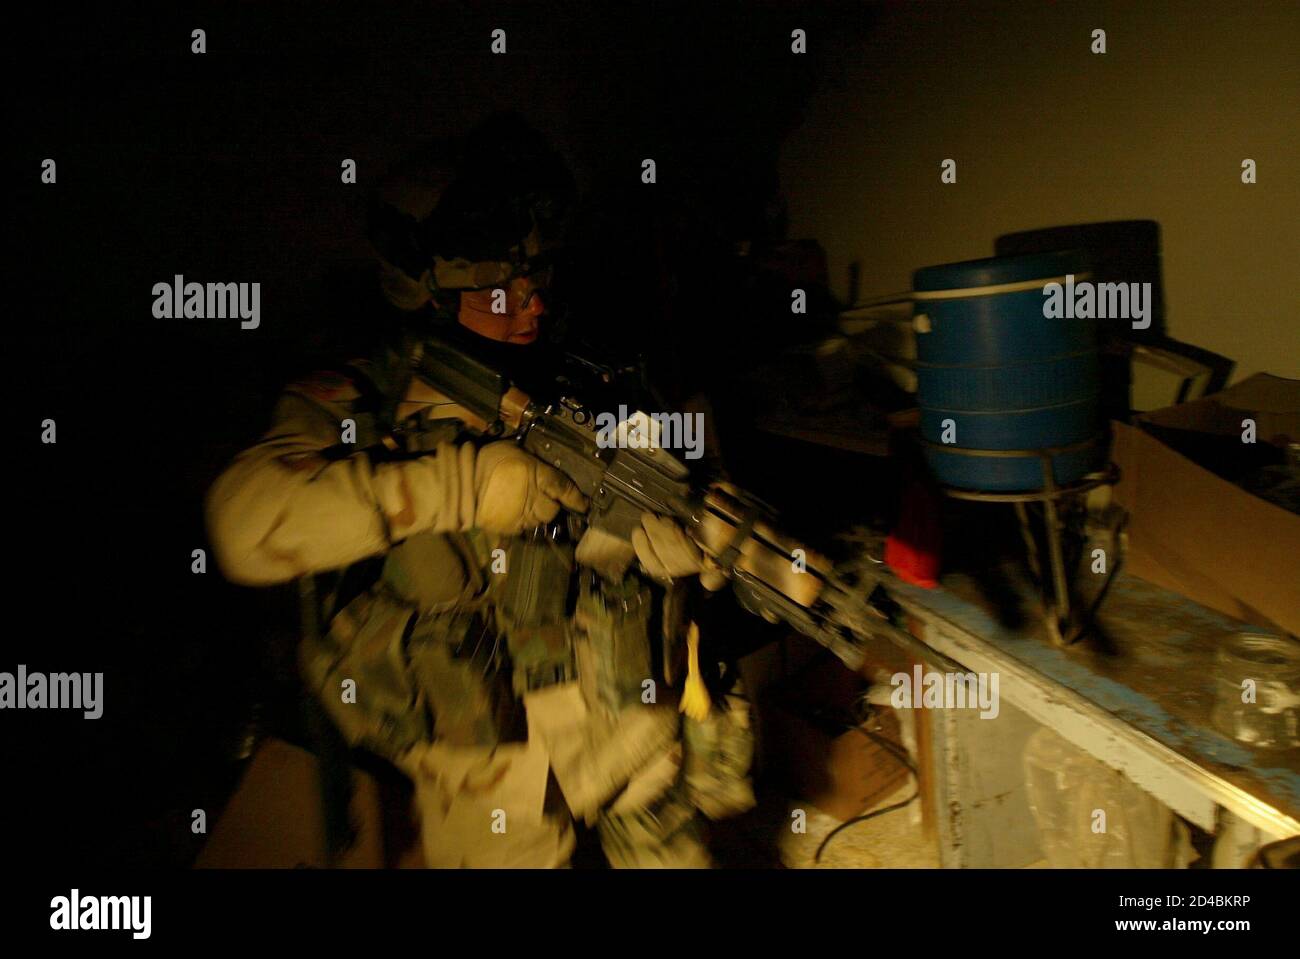 U.S. soldiers from Charlie company of the 3rd Battalion, 21st Infantry searches a house looking for explosives during a raid in Mosul, northern Iraq early January 15, 2005. [A U.S. commander warned al Qaeda ally Abu Musab al-Zarqawi, a driving force behind escalating attacks in the build up to Iraq's election, that American troops were on his trail and would capture or kill him sooner or later.] Stock Photo